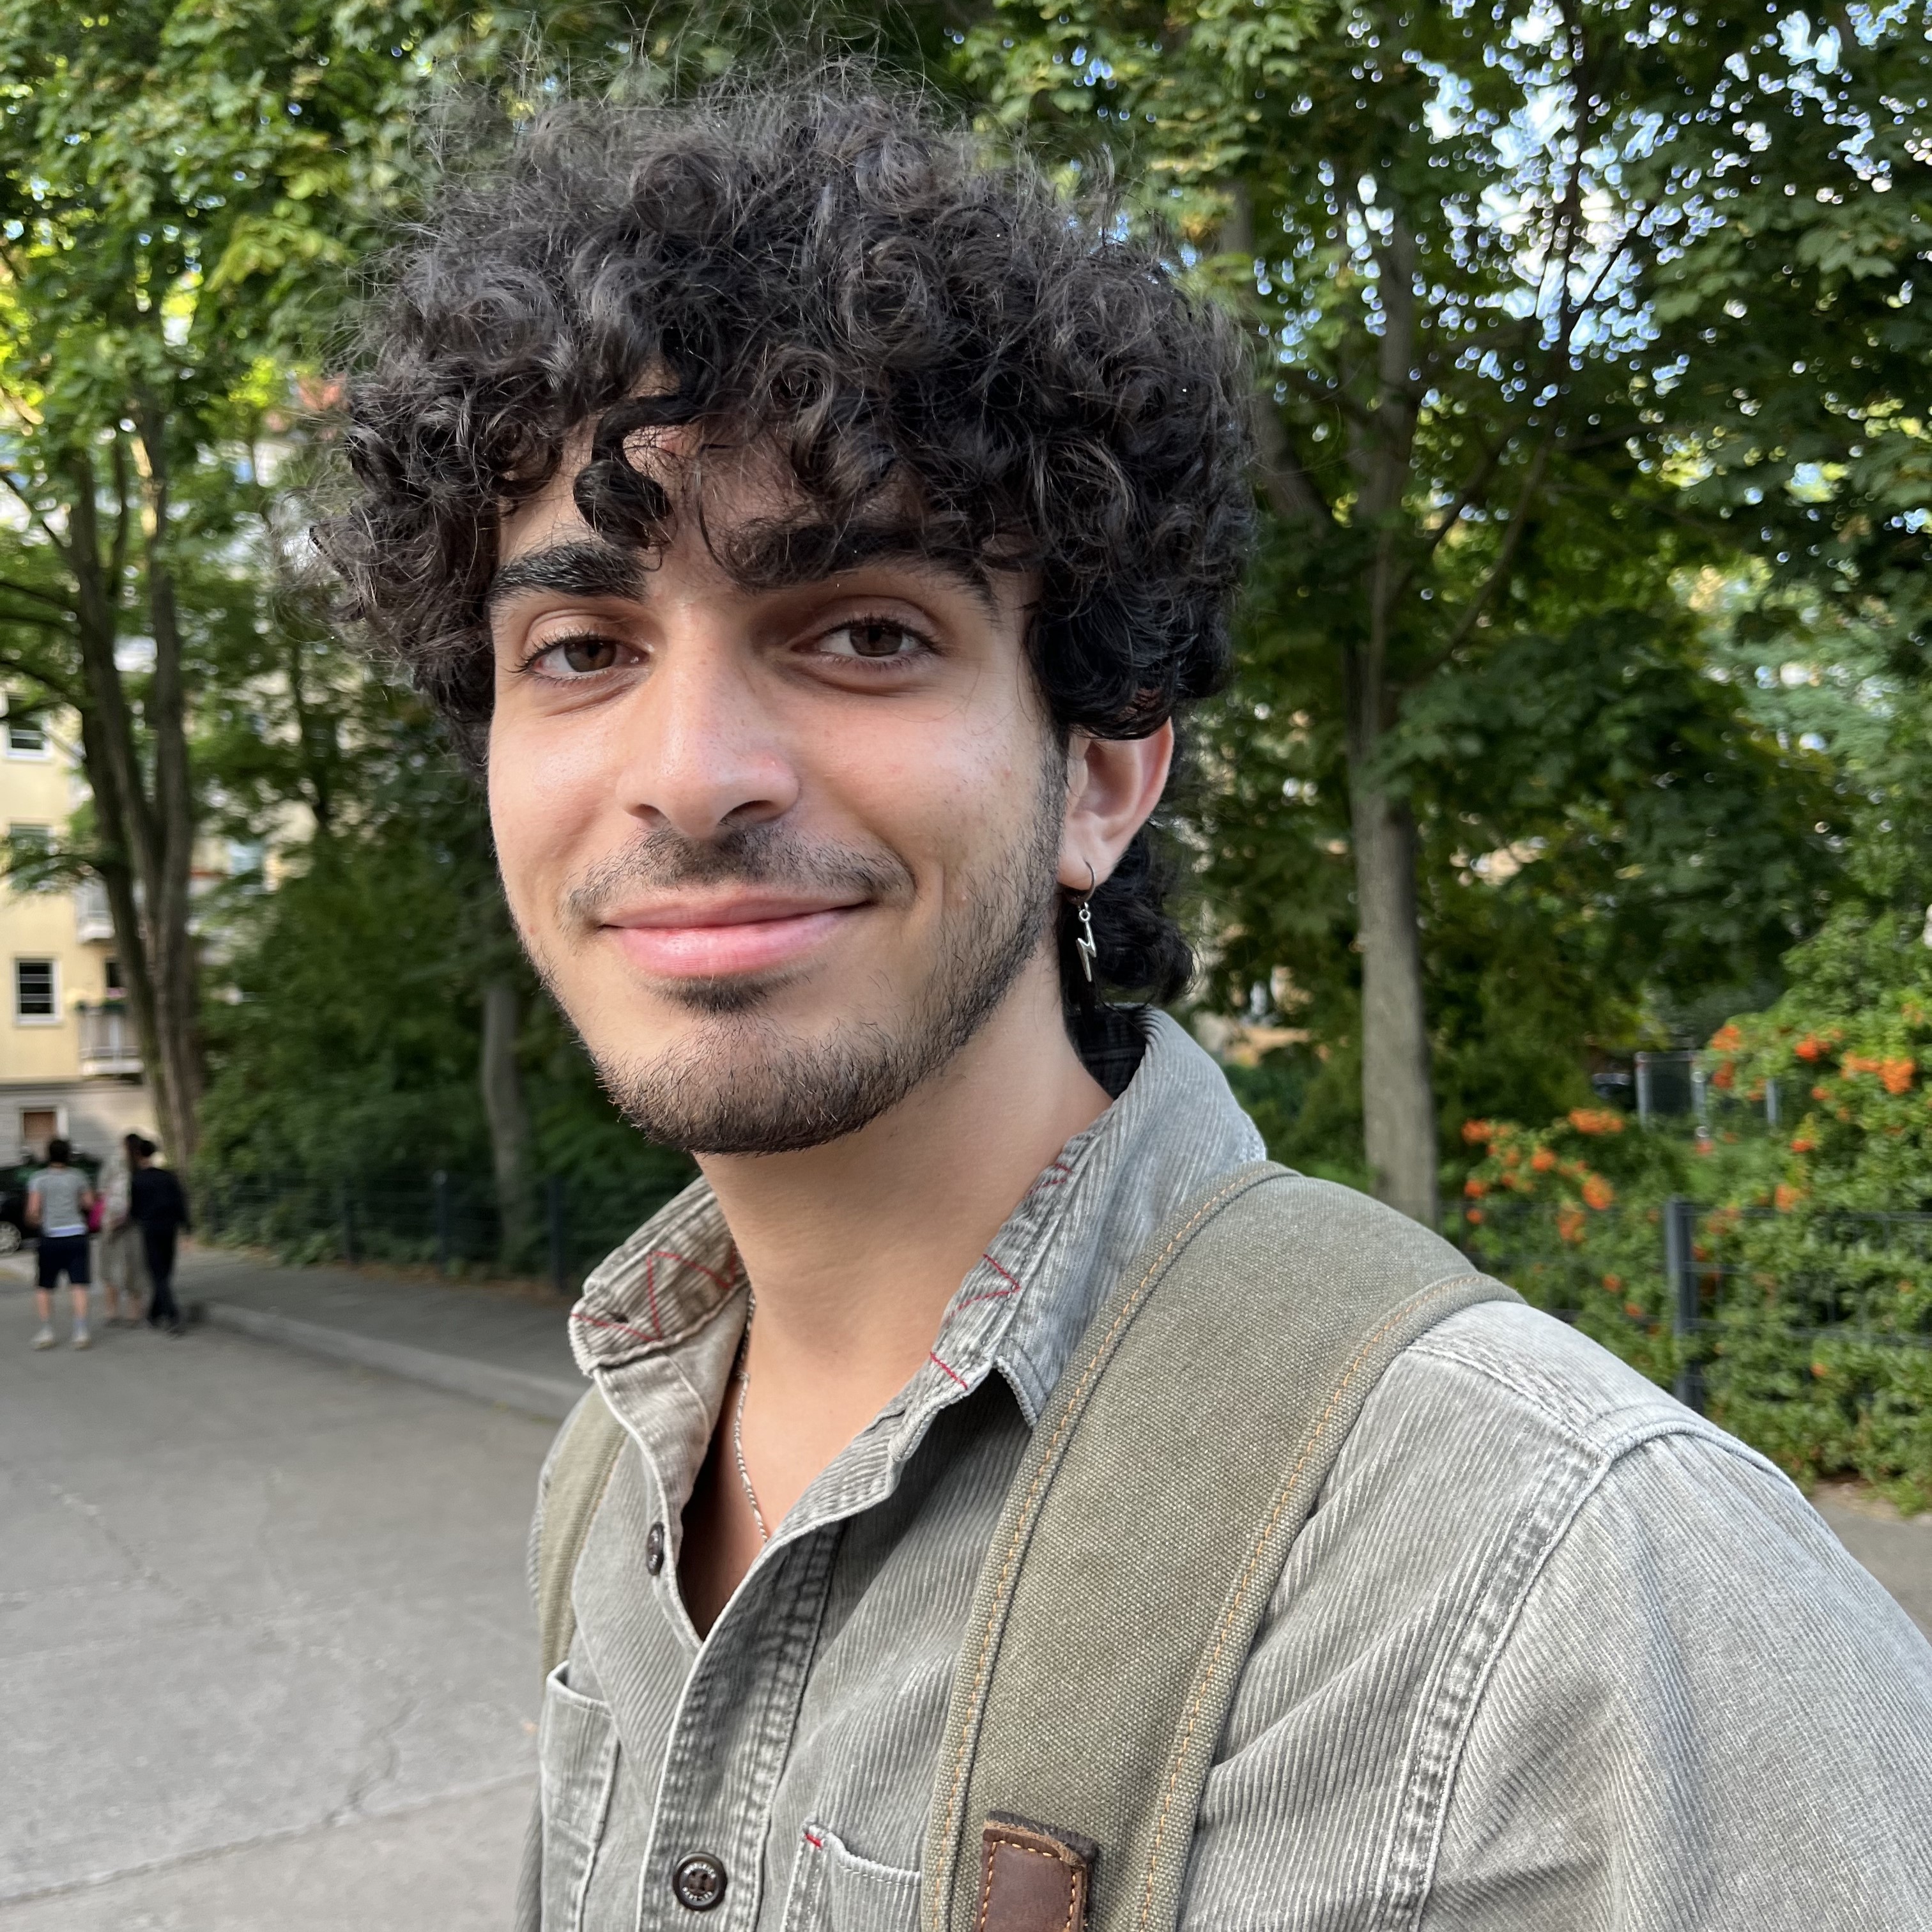 Lev Rosenberg is a fourth-year studying Computer Science & Cognitive Science. What excites him is applying his technical experience towards mission-driven projects. Lev will be working on the software team of the Aquaponics project this year!LINKEDINLINKhttps://www.linkedin.com/in/lev-rosenberg-72756a211/